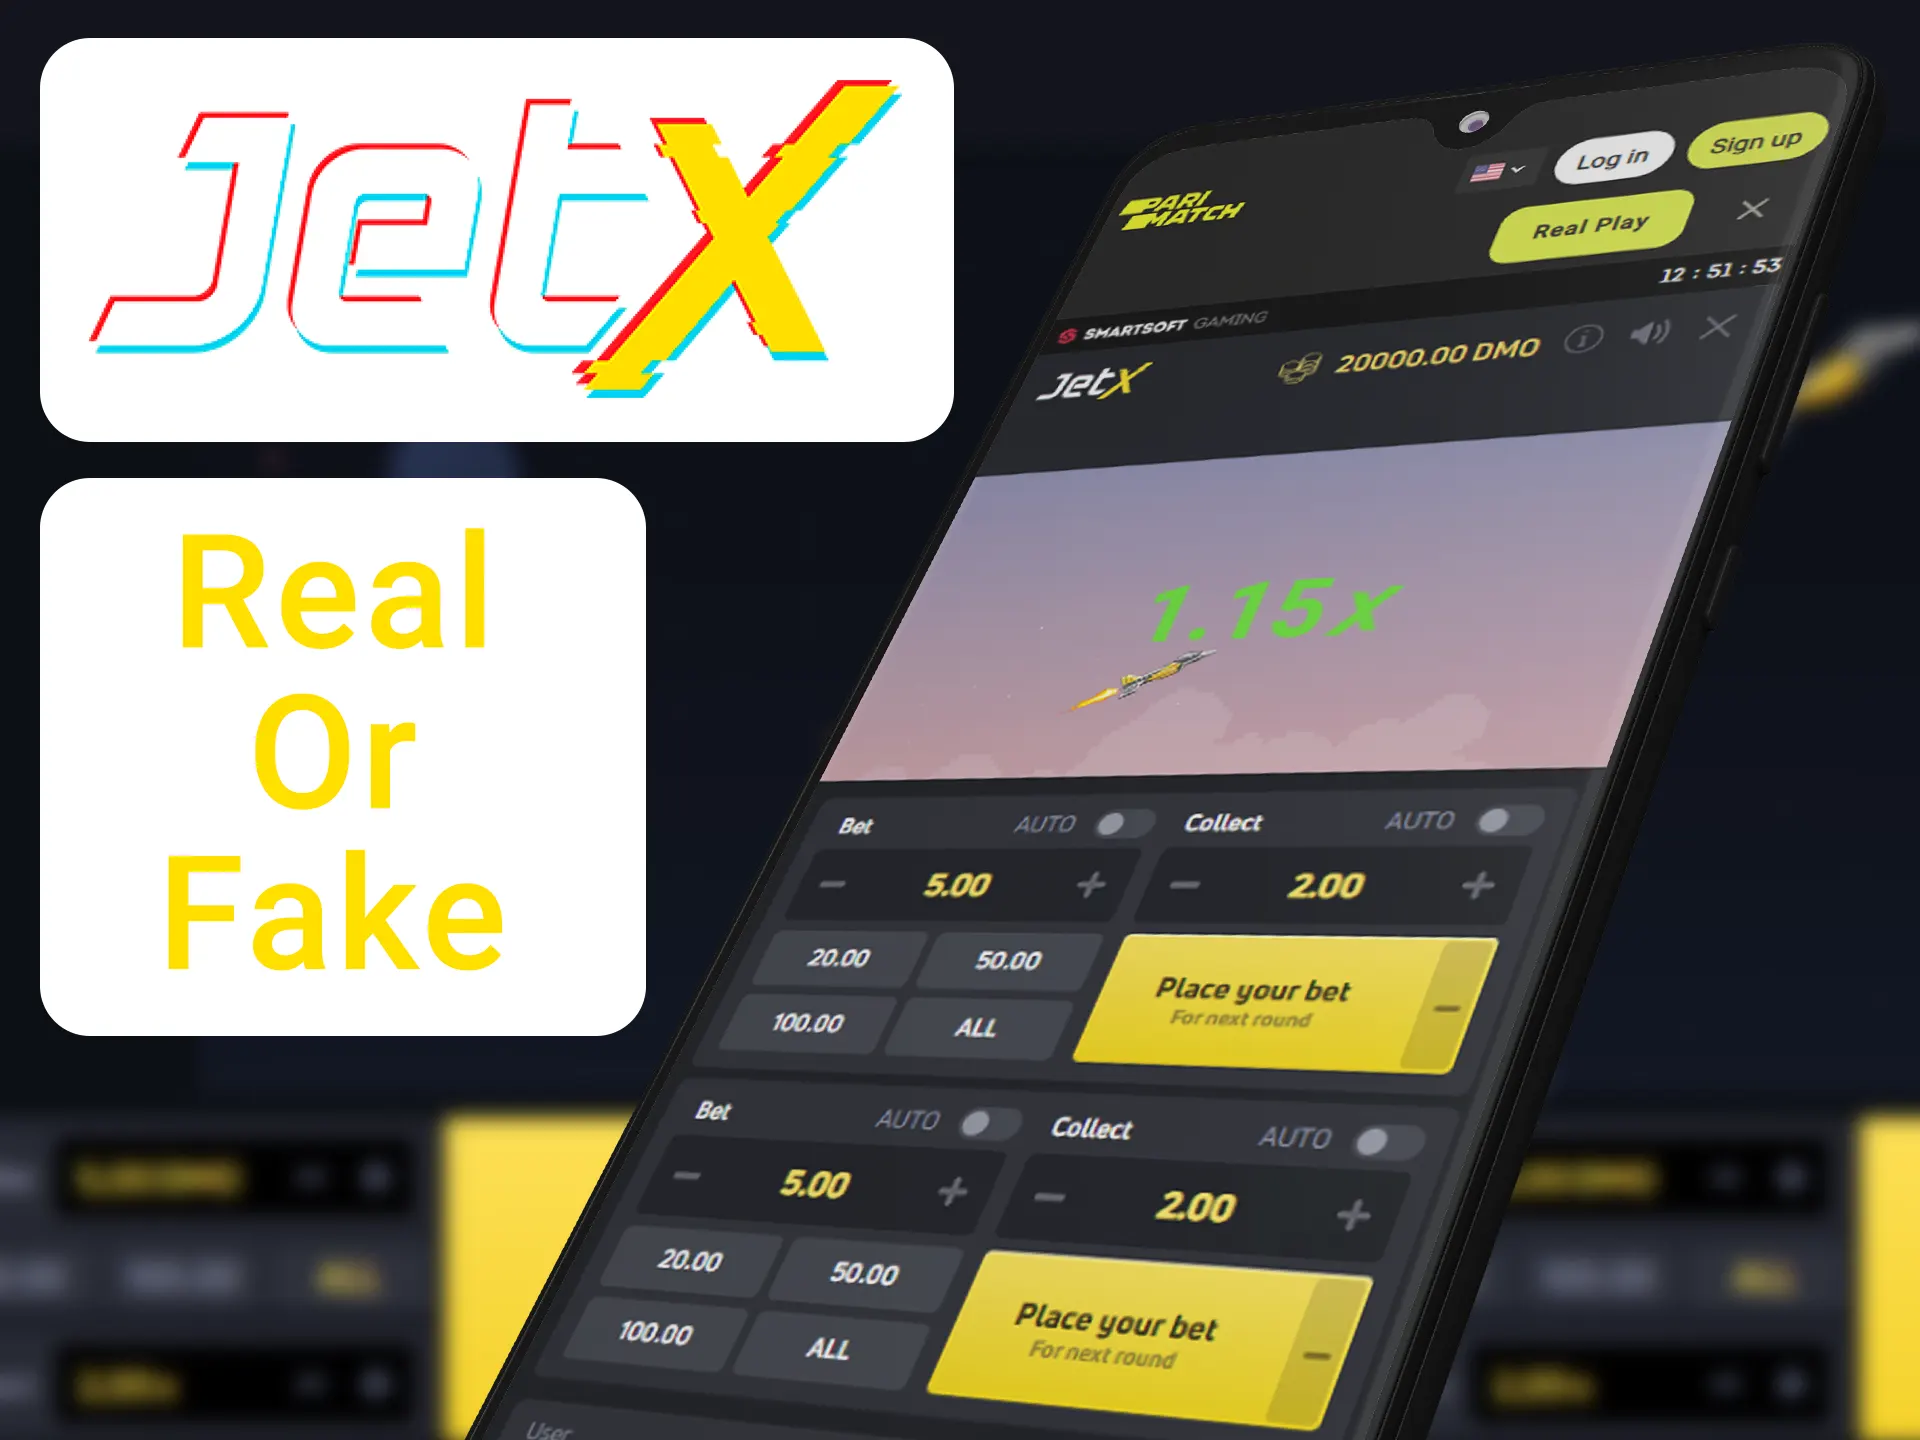 Check the casino if it's legal for playing the JetX game.